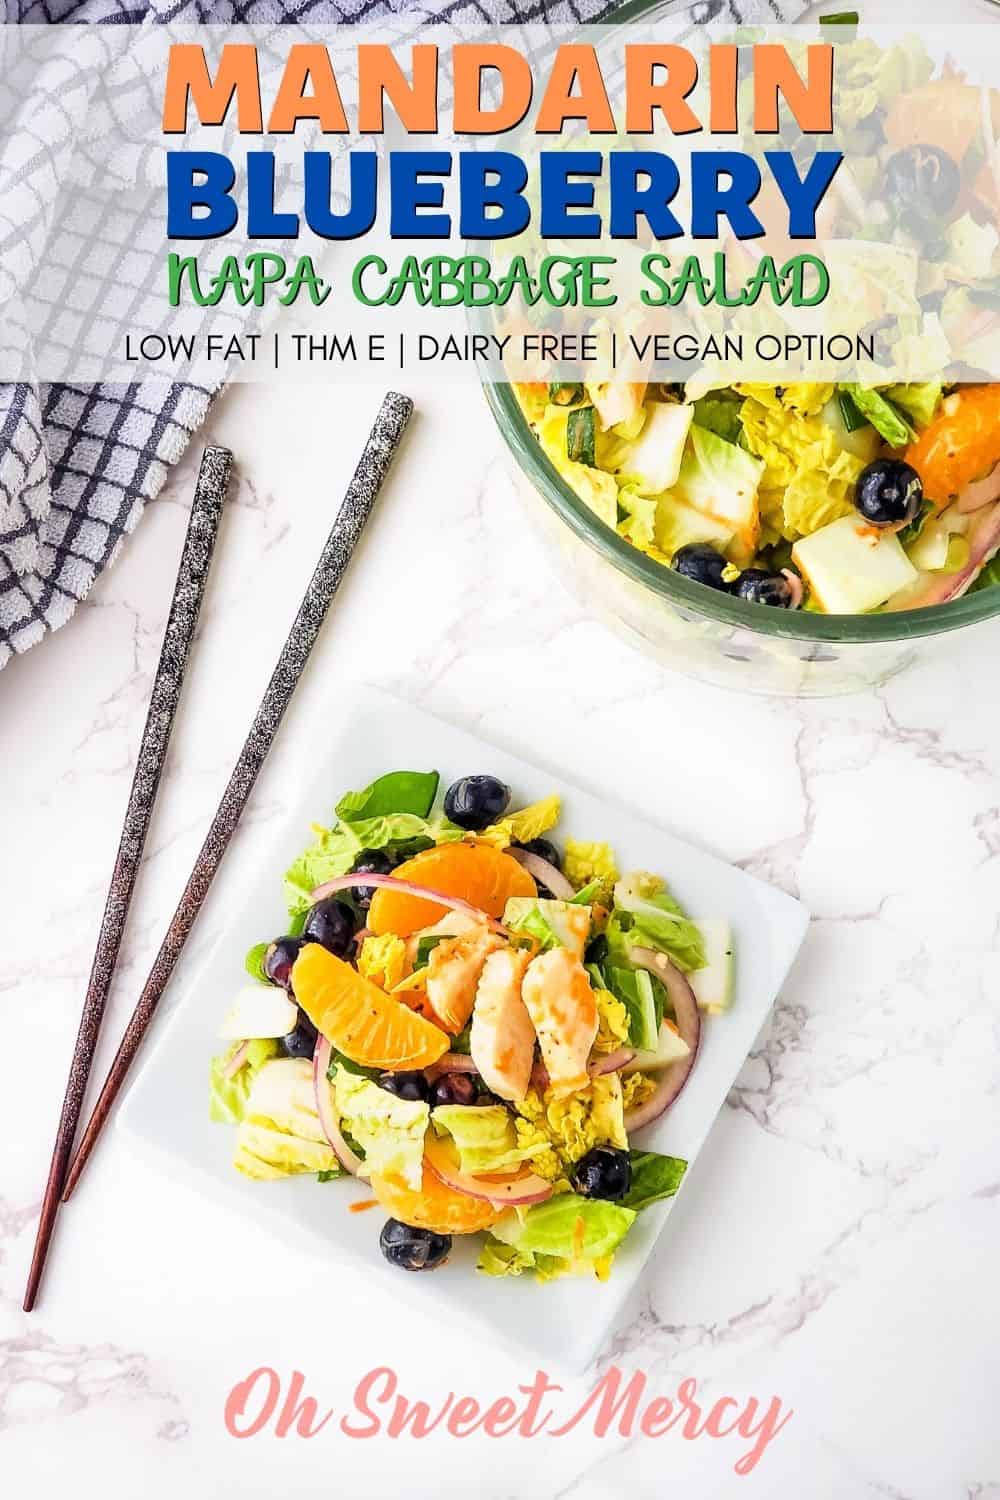 This easy low fat Mandarin Blueberry Napa Cabbage Salad is full of Asian inpired flavors plus healthy veggies and fruit. Add chicken for a main dish salad or leave it out for a delicious side dish. Dairy free, sugar free, egg free. #lowfat #thm #napacabbage #salads #sugarfree #dairyfree #vegan #vegetarian @ohsweetmercy